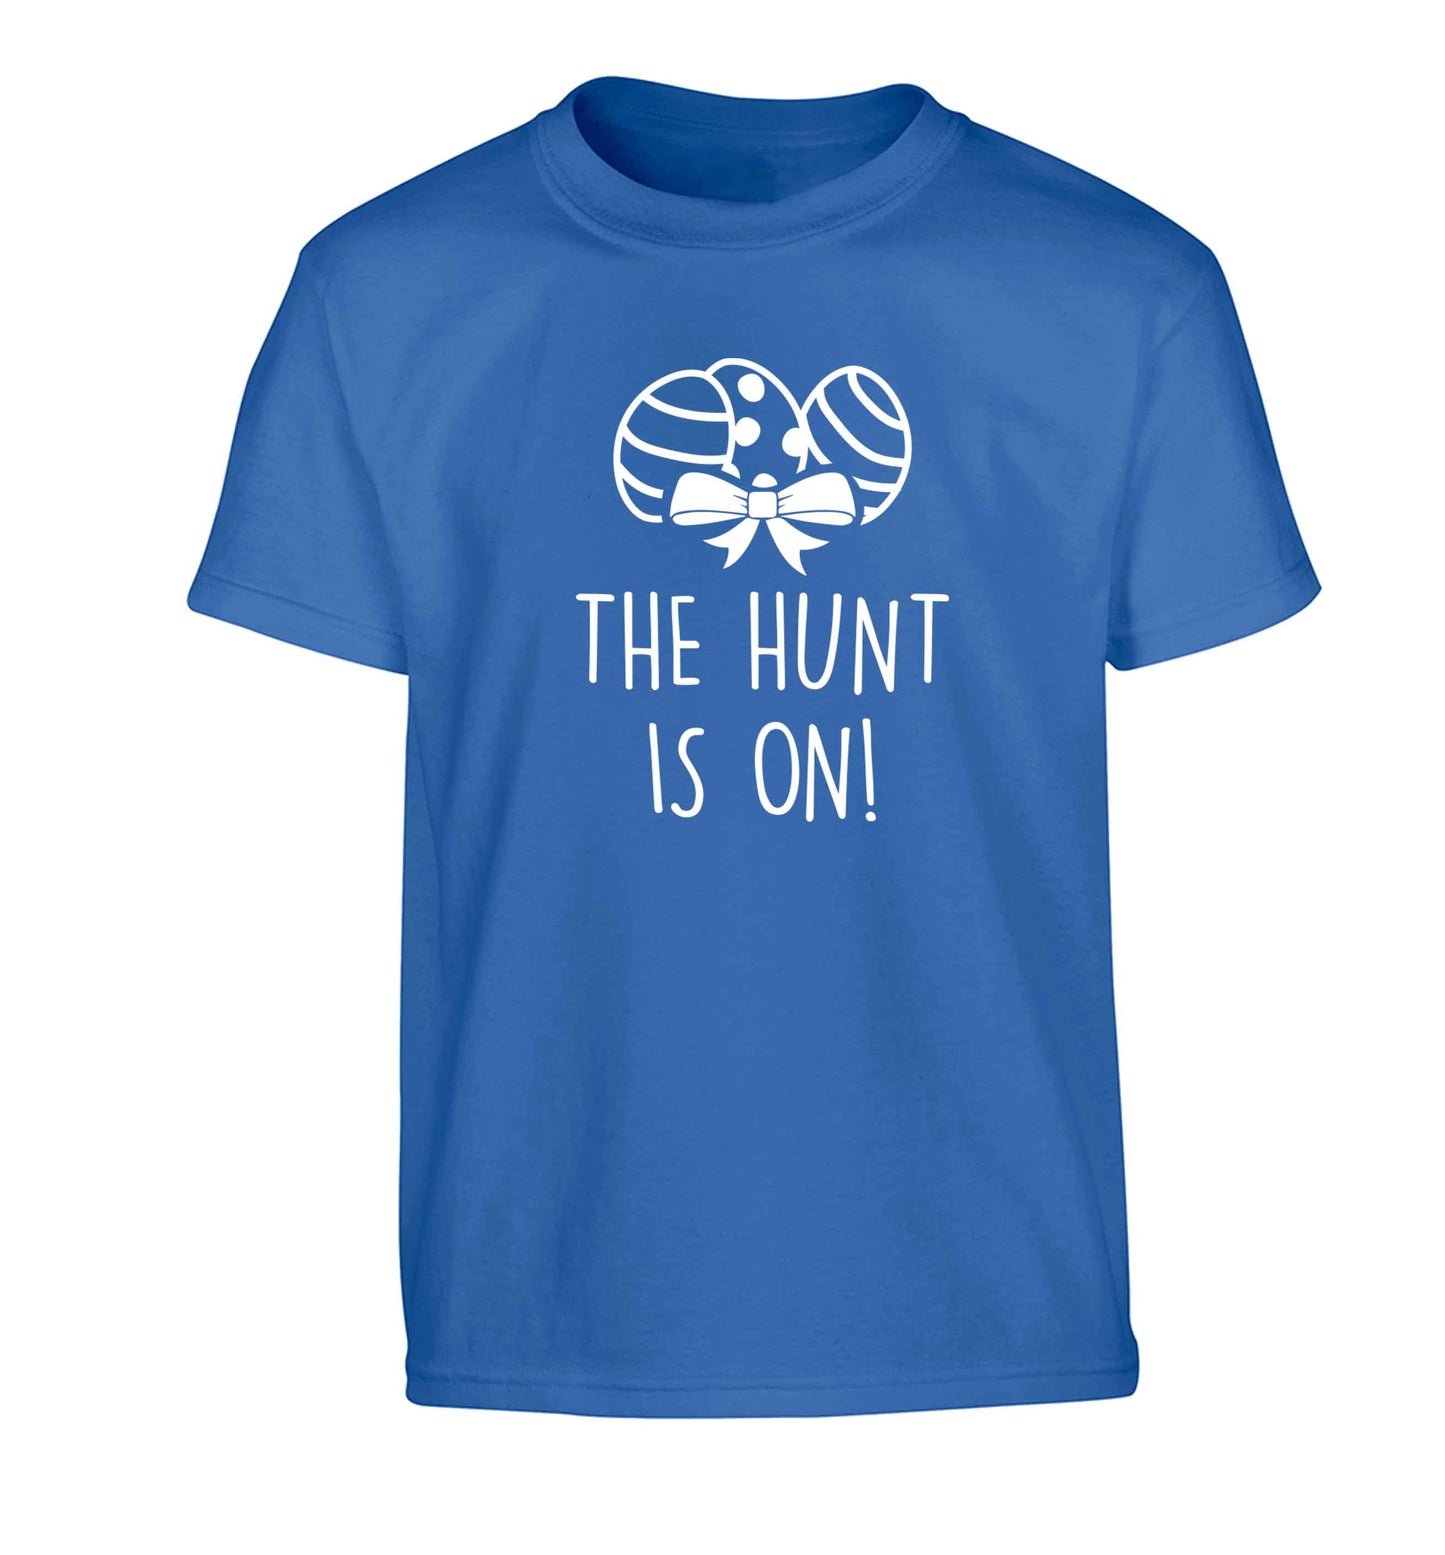 The hunt is on Children's blue Tshirt 12-13 Years